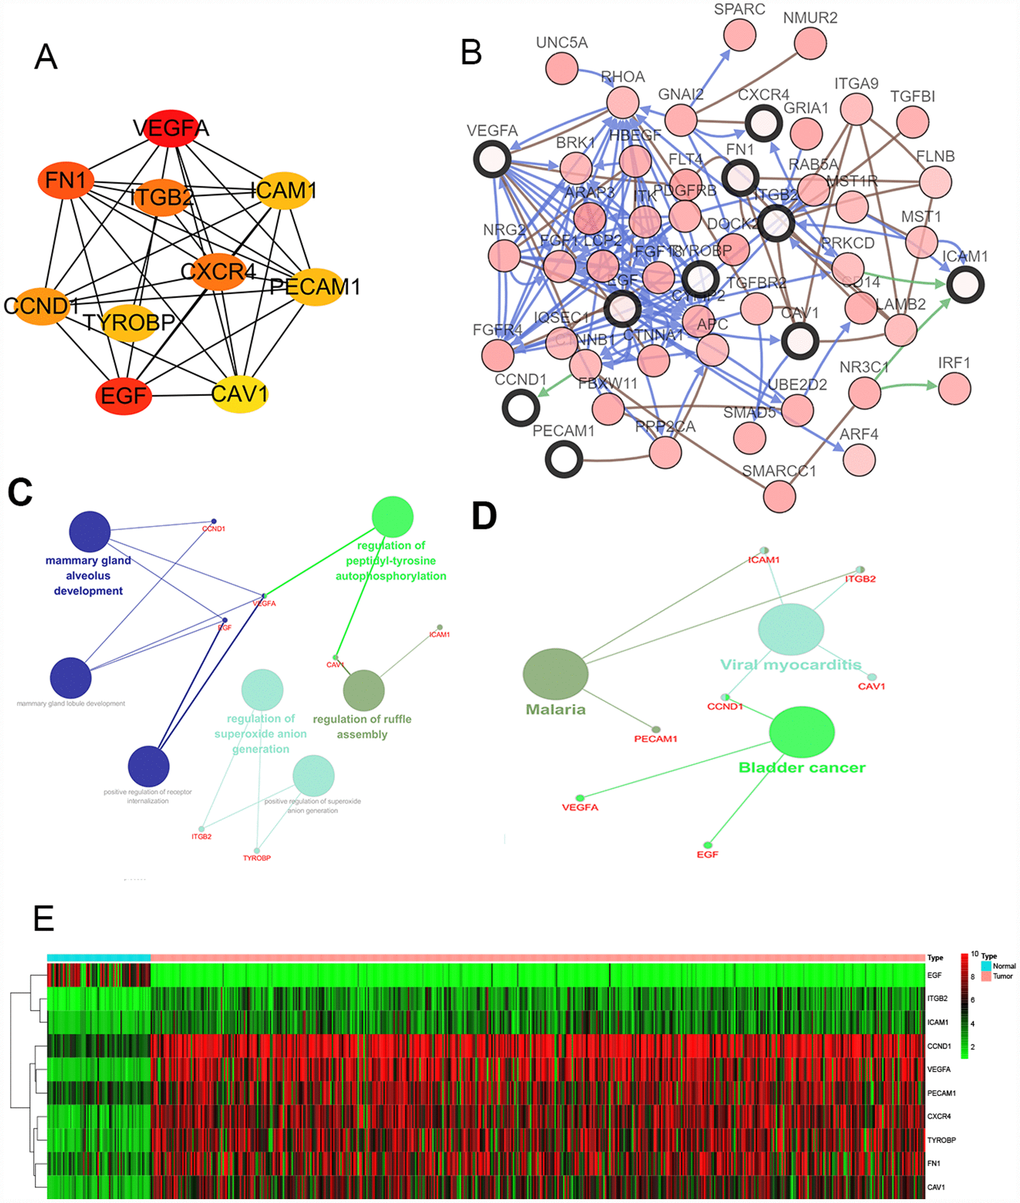 Interaction network and analysis of the hub genes. (A) Screen out the 10 most important hub genes using the cytoscape software plugin cytoHubba. (B) Hub genes and their co-expression genes were analyzed using cBioPortal. Nodes with bold black outline represent hub genes. Nodes with thin black outline represent the co-expression genes. (C) The biologic process functional annotation analysis of hub genes was performed by ClueGO and CluePedia. Different colors of nodes refer to the functional annotation of ontologies. Corrected P value D) The KEGG functional annotation analysis of hub genes was performed by ClueGO and CluePedia. Different colors of nodes refer to the functional annotation of ontologies. Corrected P value E) Hierarchical clustering heatmap of 10 most important hub genes was constructed depend on TCGA cohort. Red indicates that the expression of genes is relatively upregulated, green indicates that the expression of genes is relatively downregulated, and black indicates no significant changes in gene expression; gray indicates that the signal strength of genes was not high enough to be detected. Abbreviation: TCGA: the cancer genome atlas program; KEGG: Kyoto Encyclopedia of Genes and Genomes.